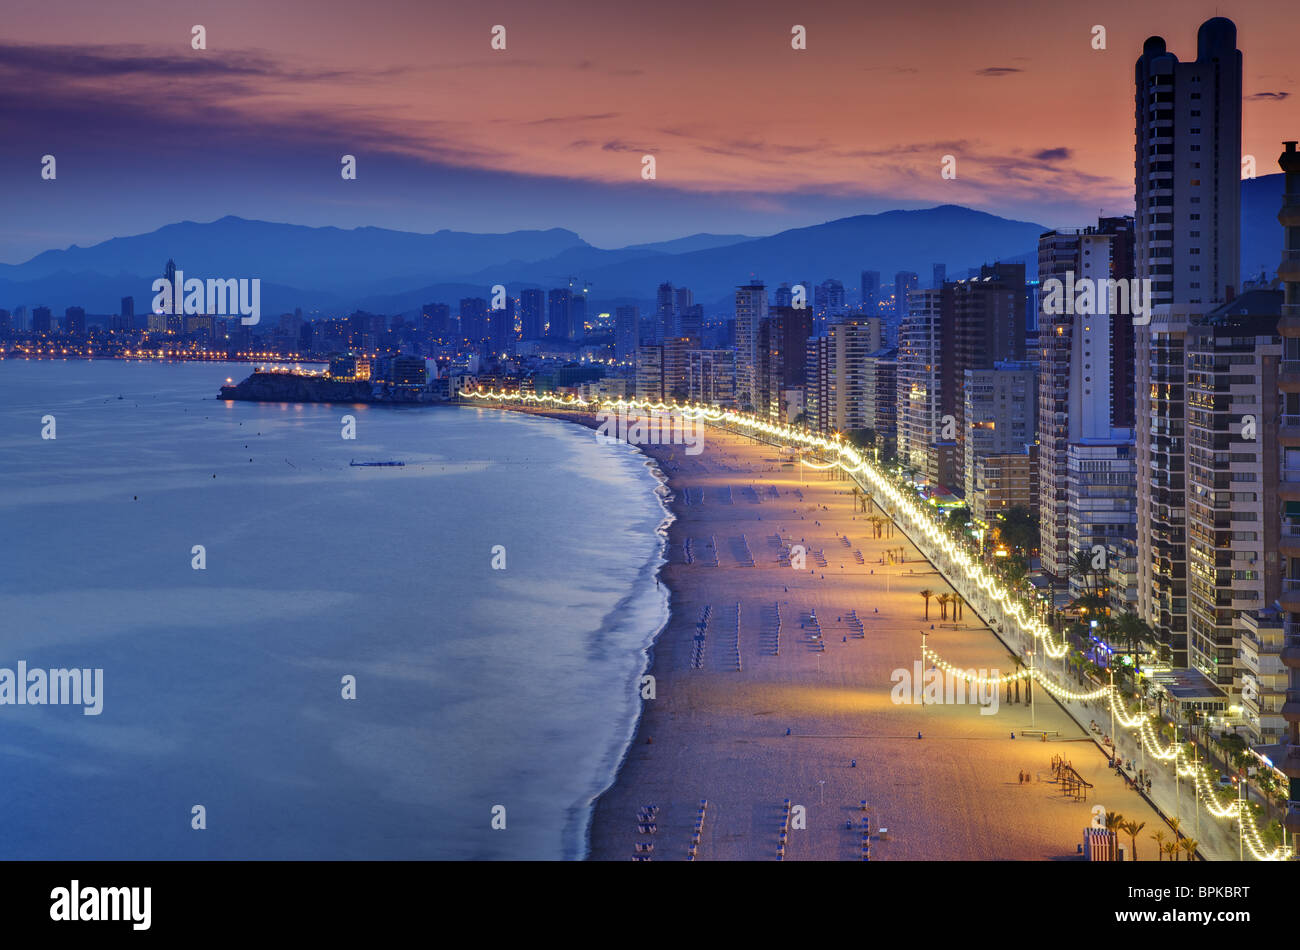 Attractive aerial view of Benidorm's Levante beach at sunset, with its buildings facade and lighted promenade on the right. Stock Photo